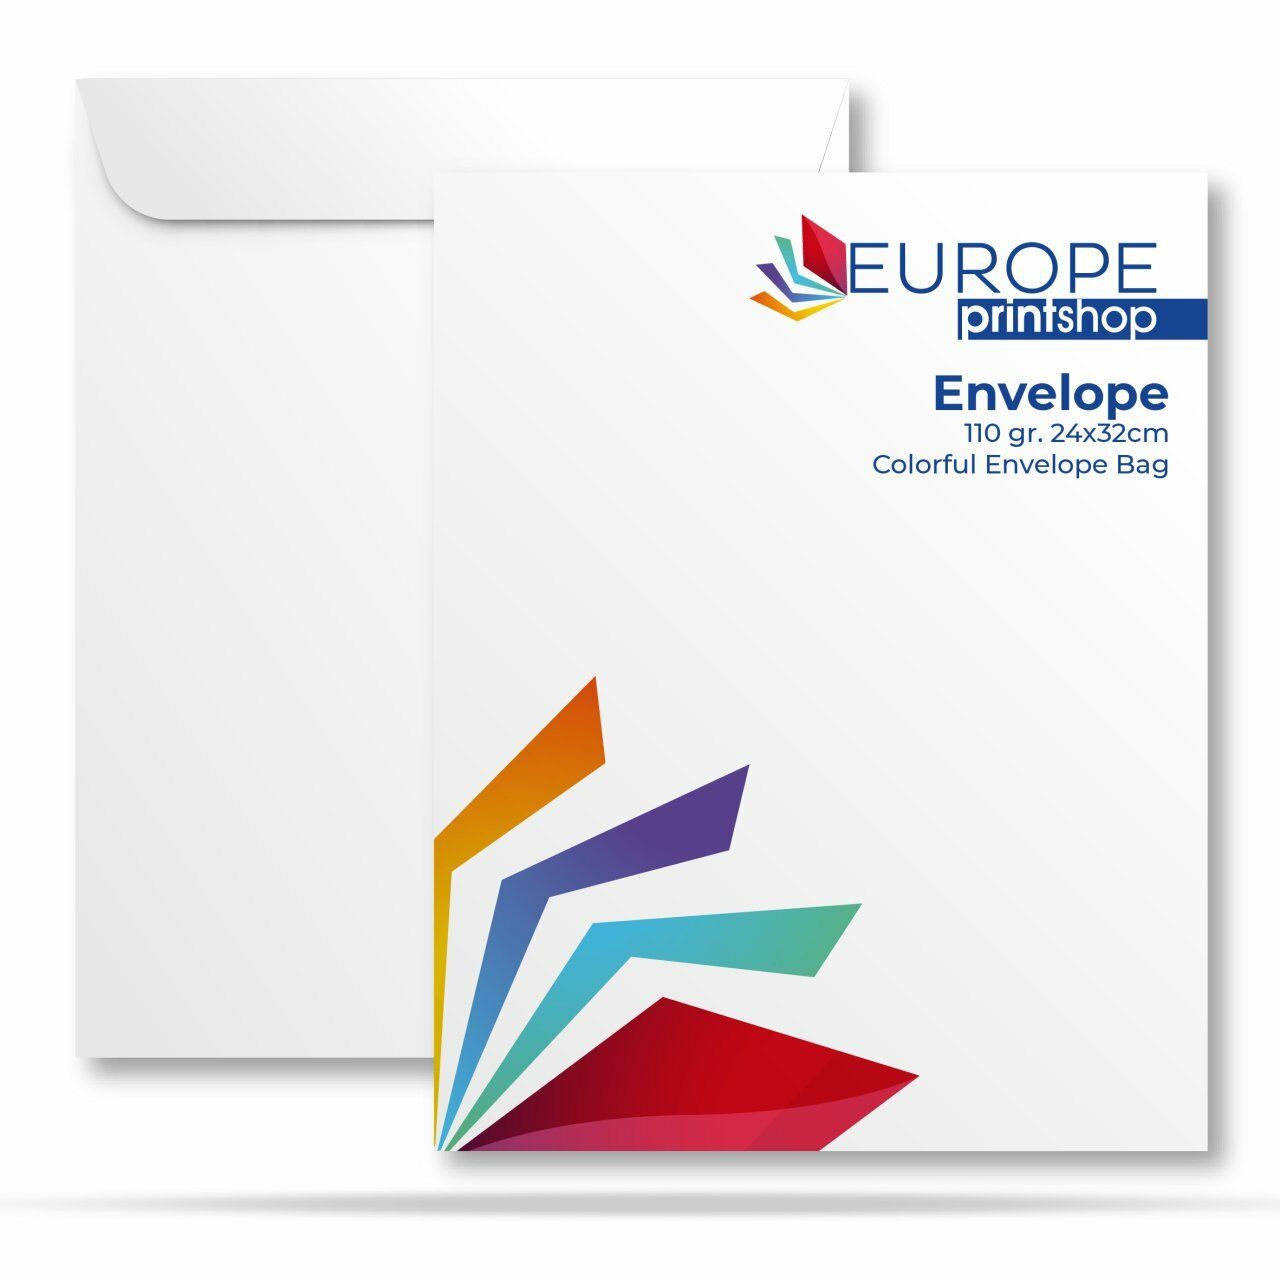 Diplomatic envelopes are the preferred choice when you seek to convey a special occasion or deliver an important message. Usually crafted from high-quality and durable materials, they serve the purpose of safeguarding the envelope's contents.